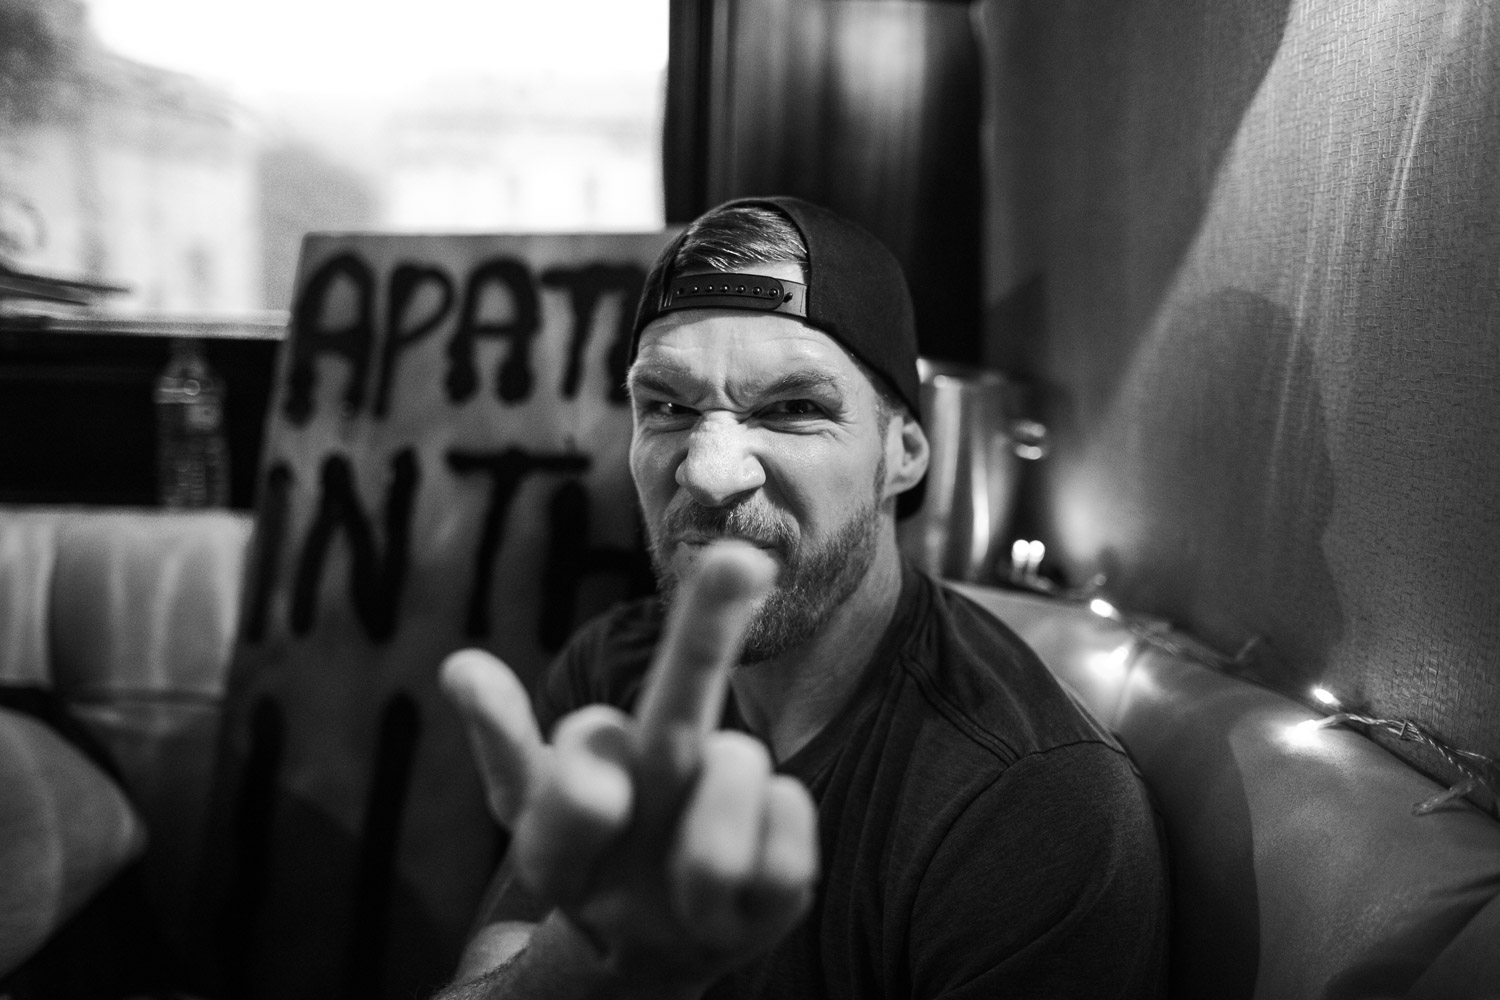 Tim Commerford giving the finger on a bus